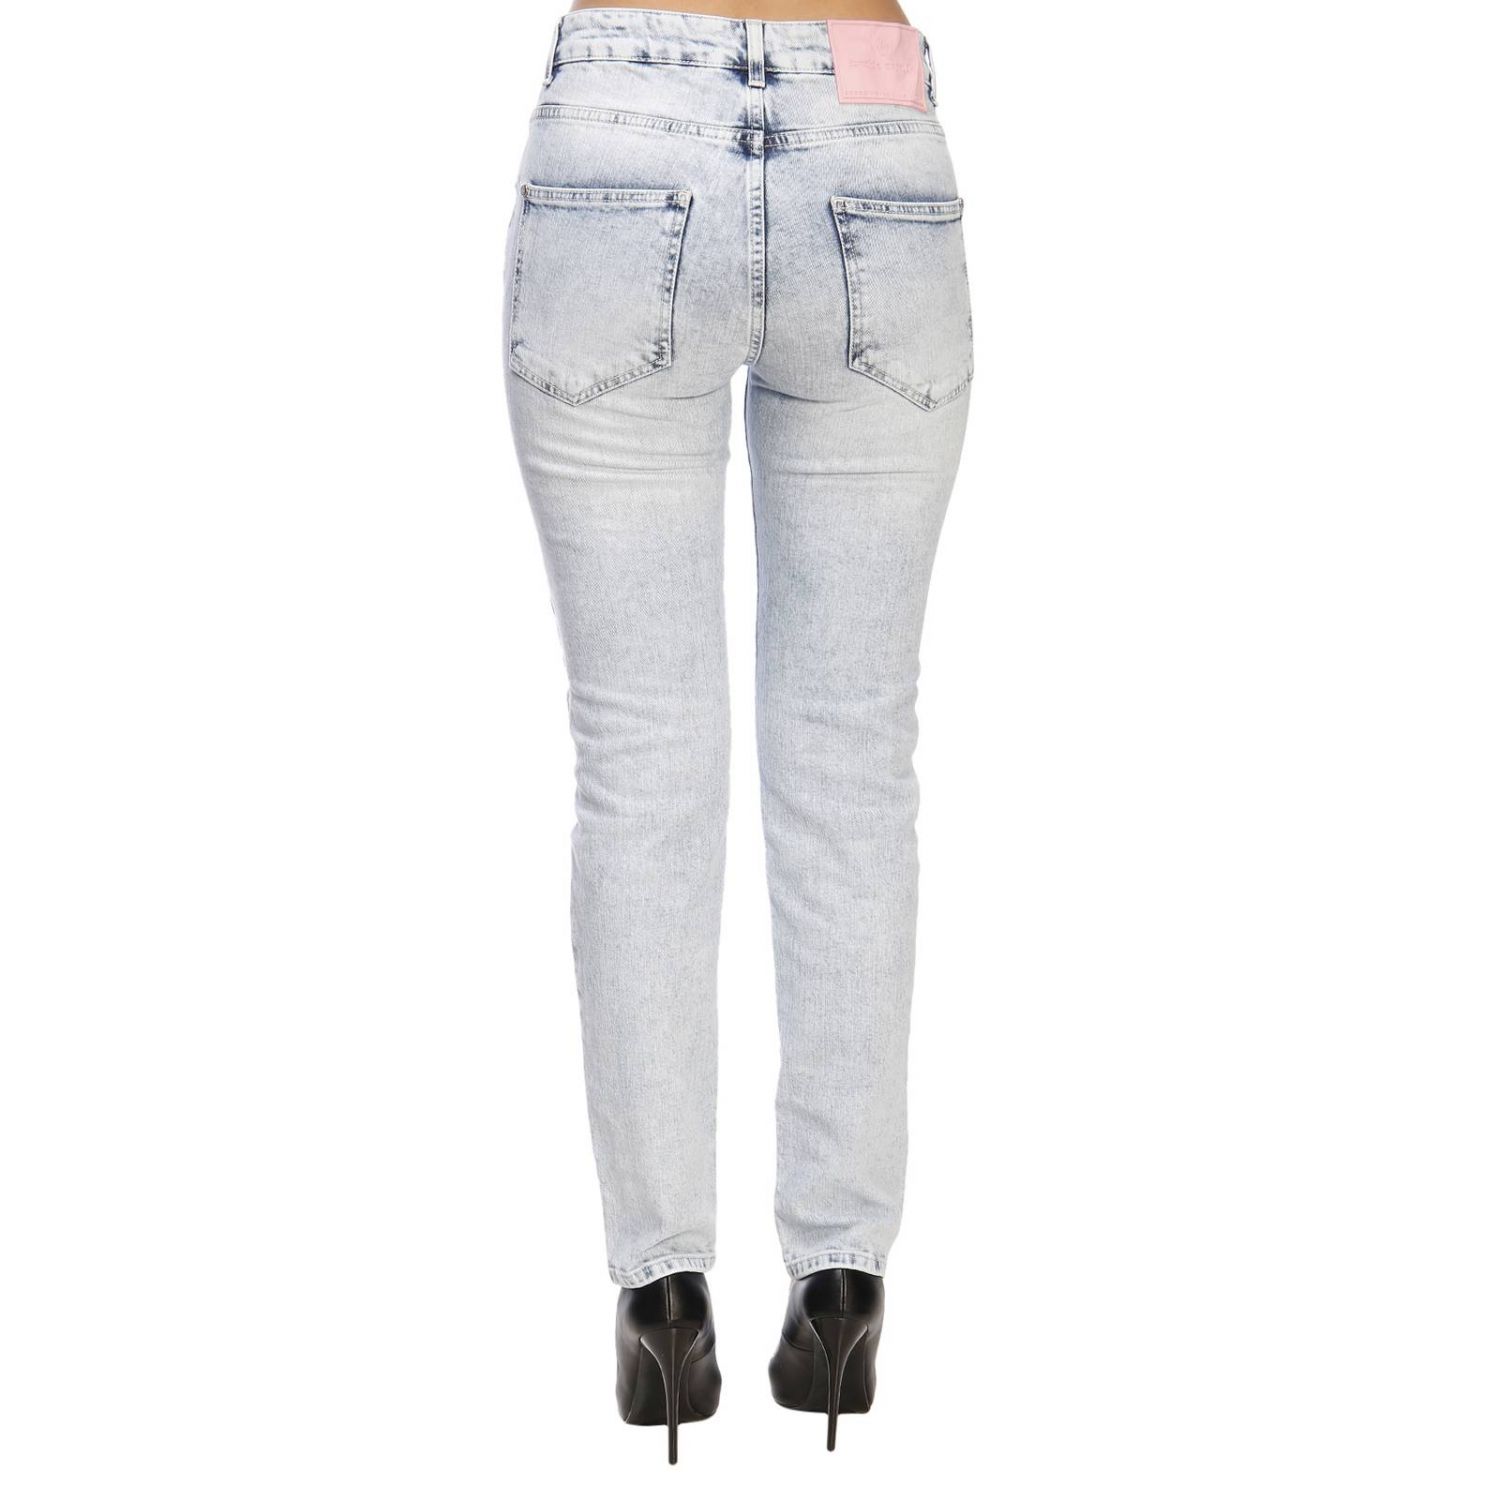 Frankie Morello Outlet: Jeans women - Stone Washed | Jeans Frankie ...